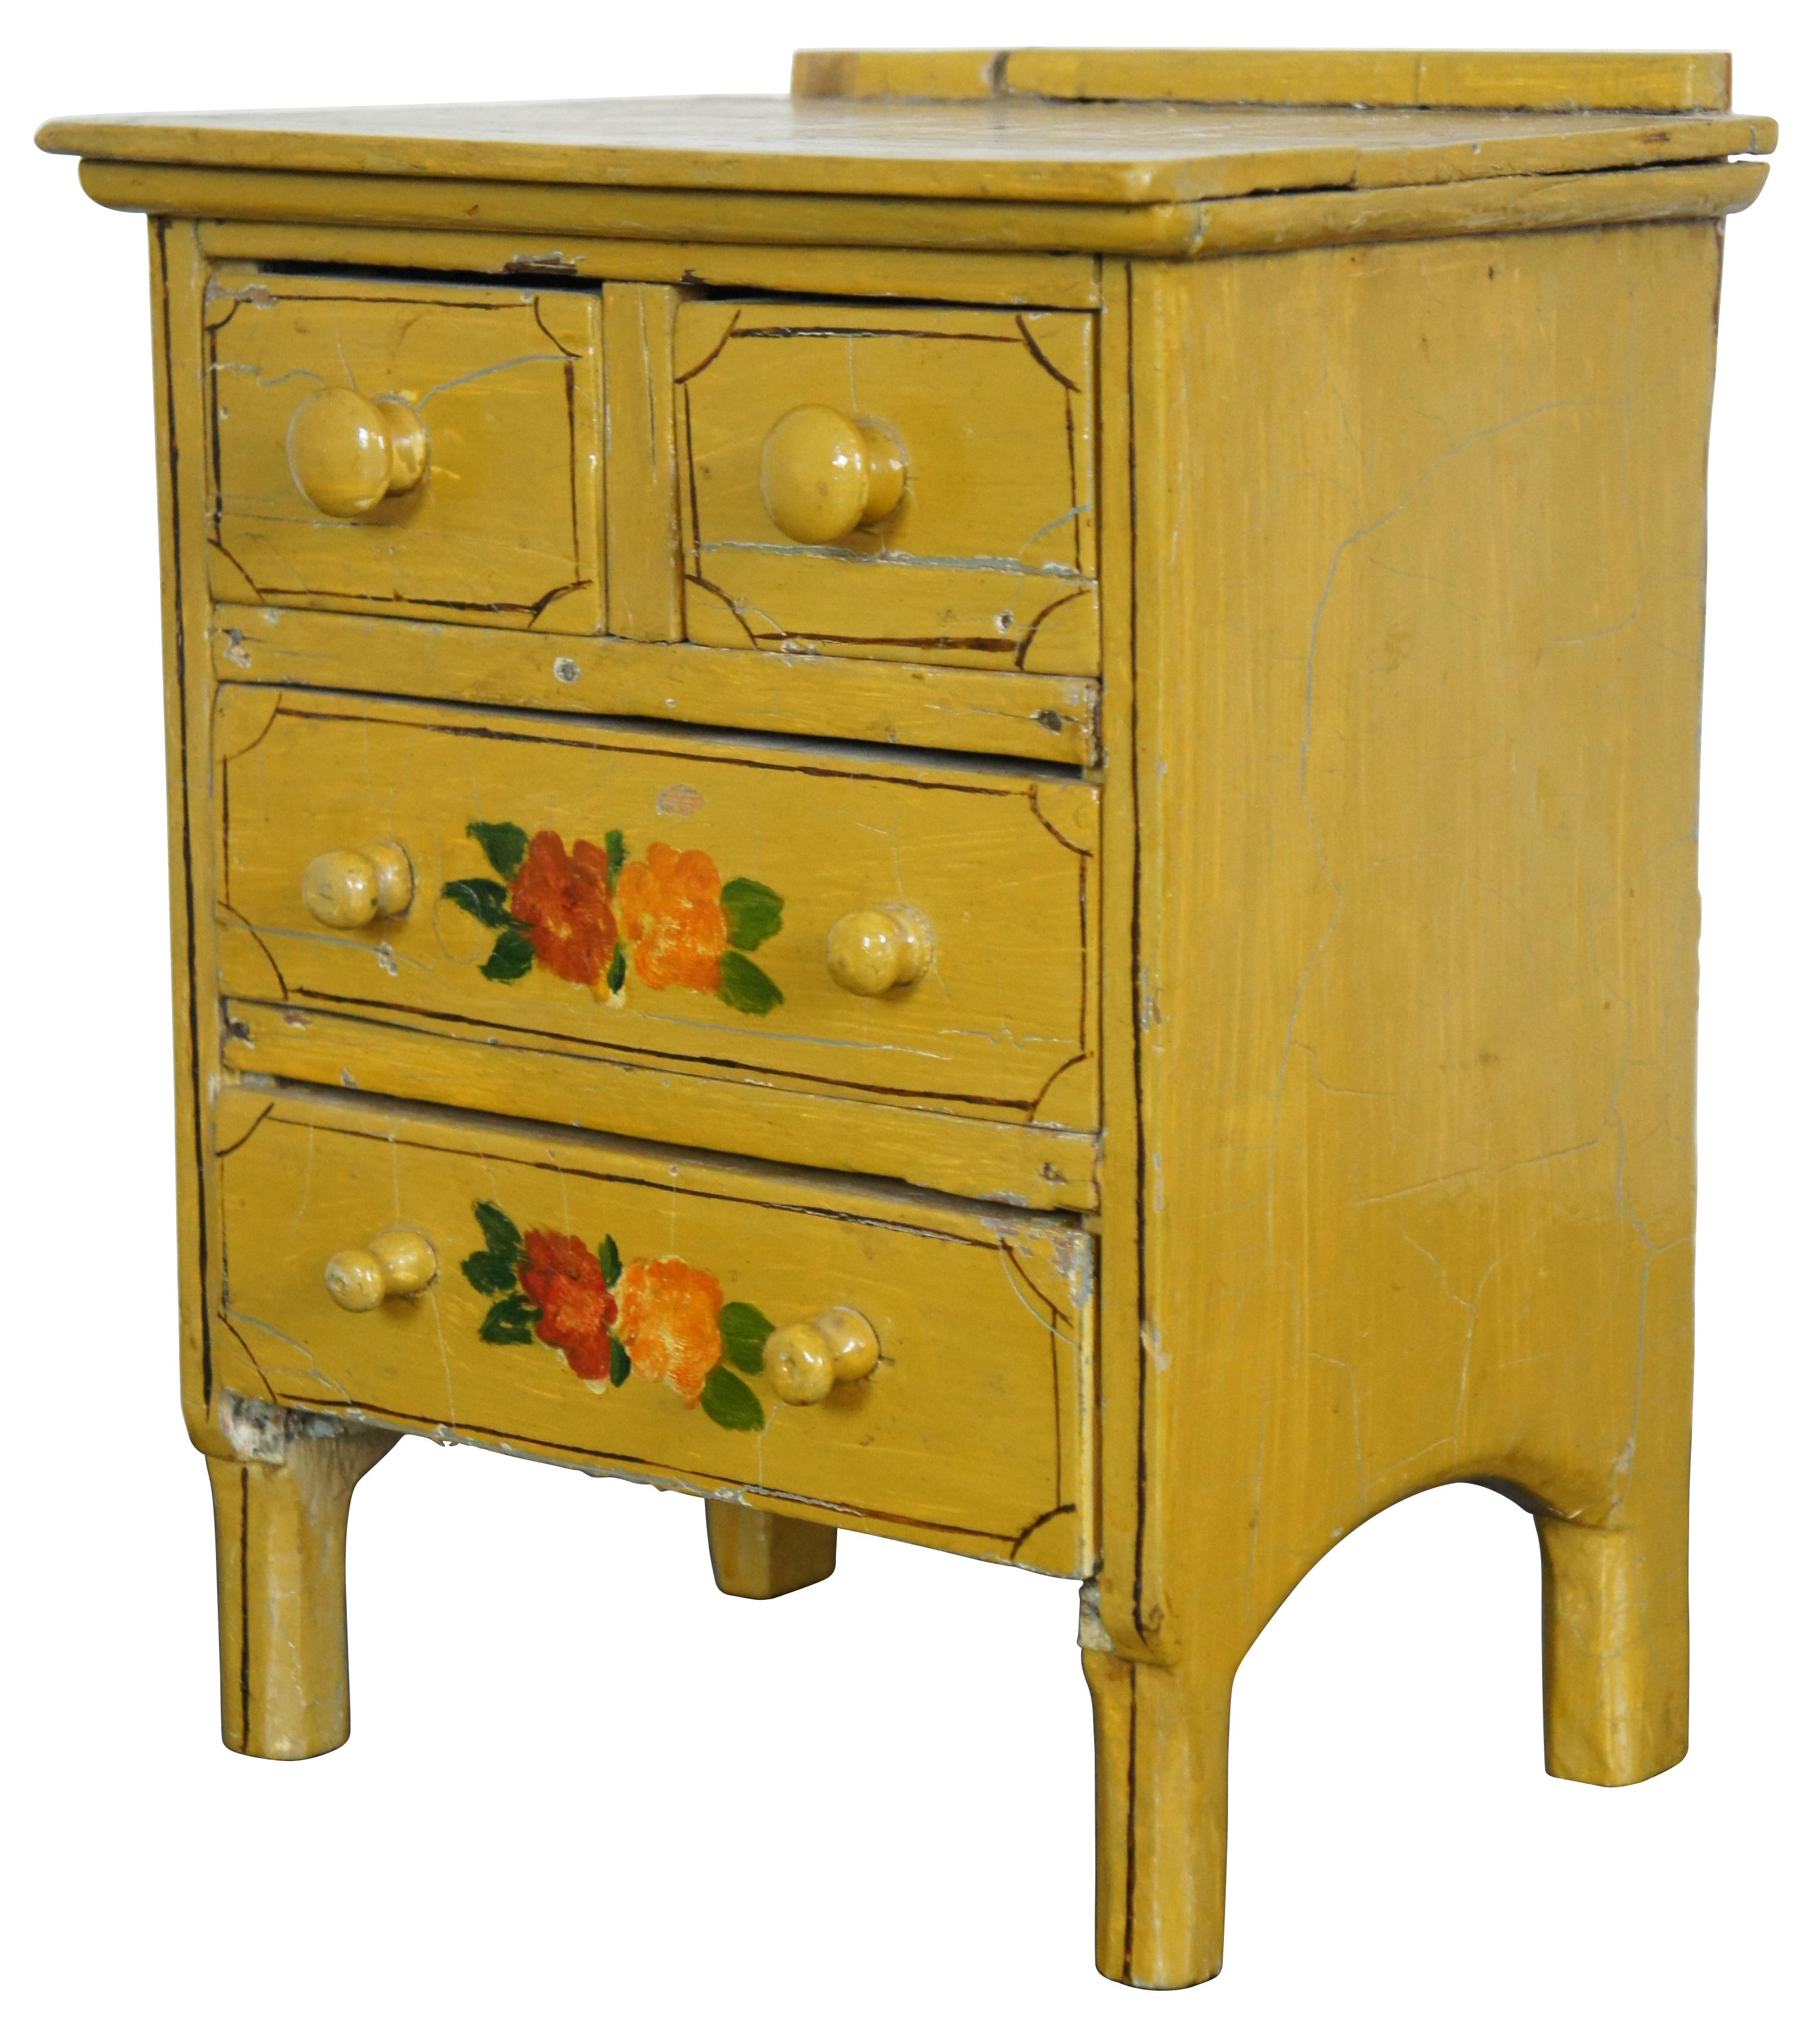 Antique miniature chest of four drawers, painted in yellow with brown details and red and orange folk art style flowers.